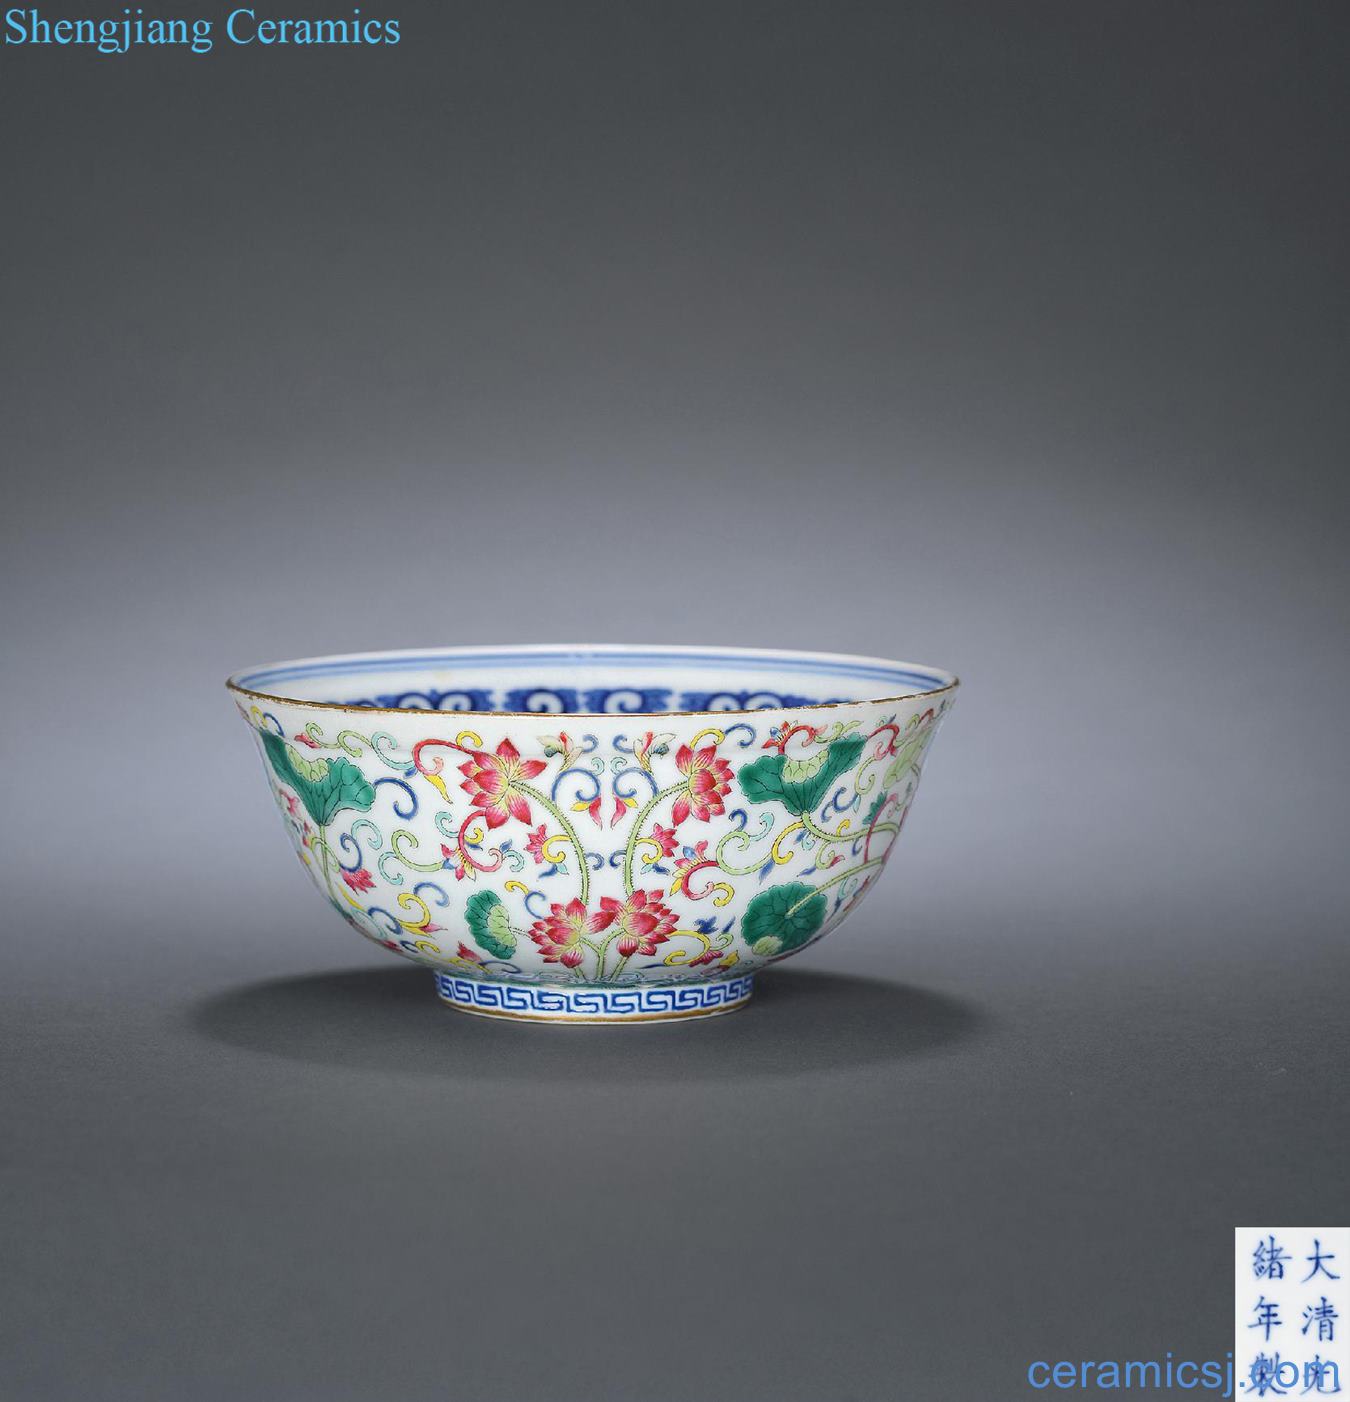 In the reign of qing emperor guangxu outside pastel blue lotus pattern bowl